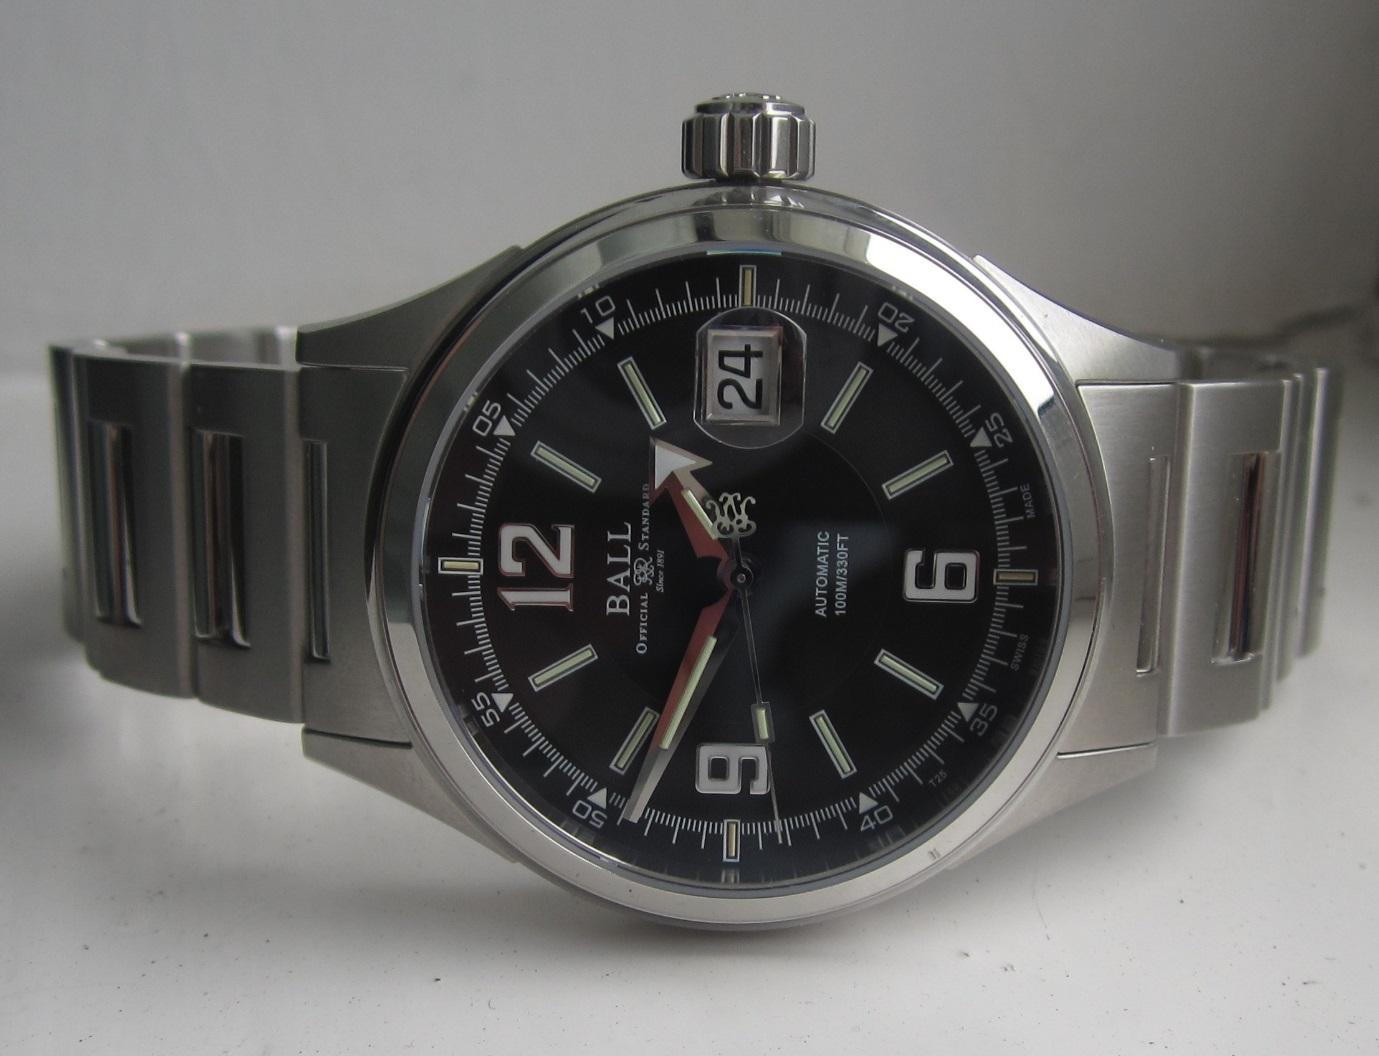 Ball Fireman Racer: Entry Level Watch? Yes & No... - AMJ Watches Blog